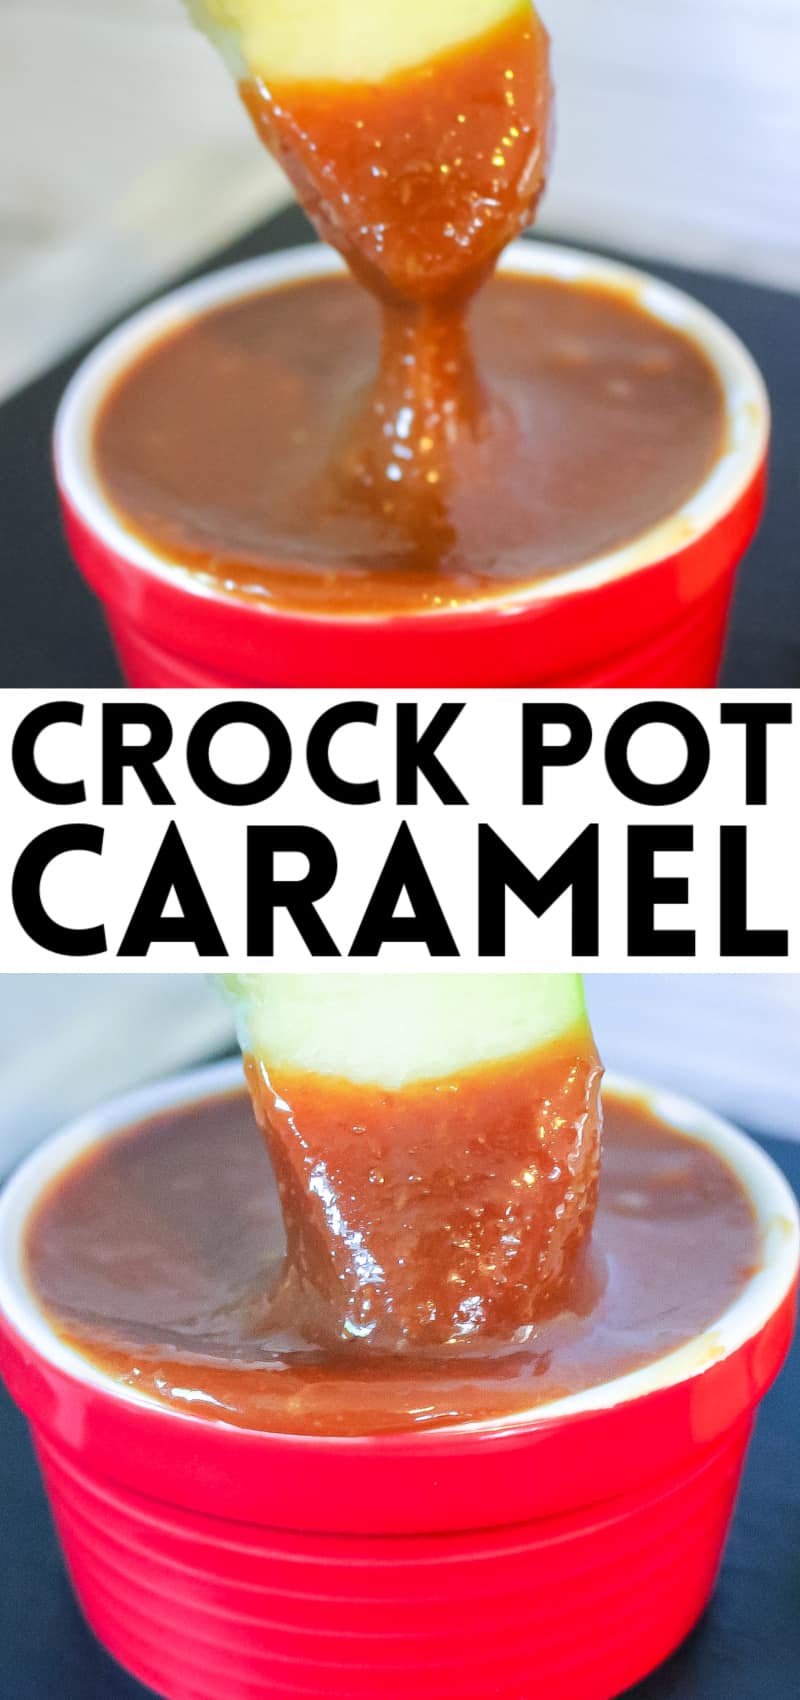 apple dipping in red dish with crock pot caramel